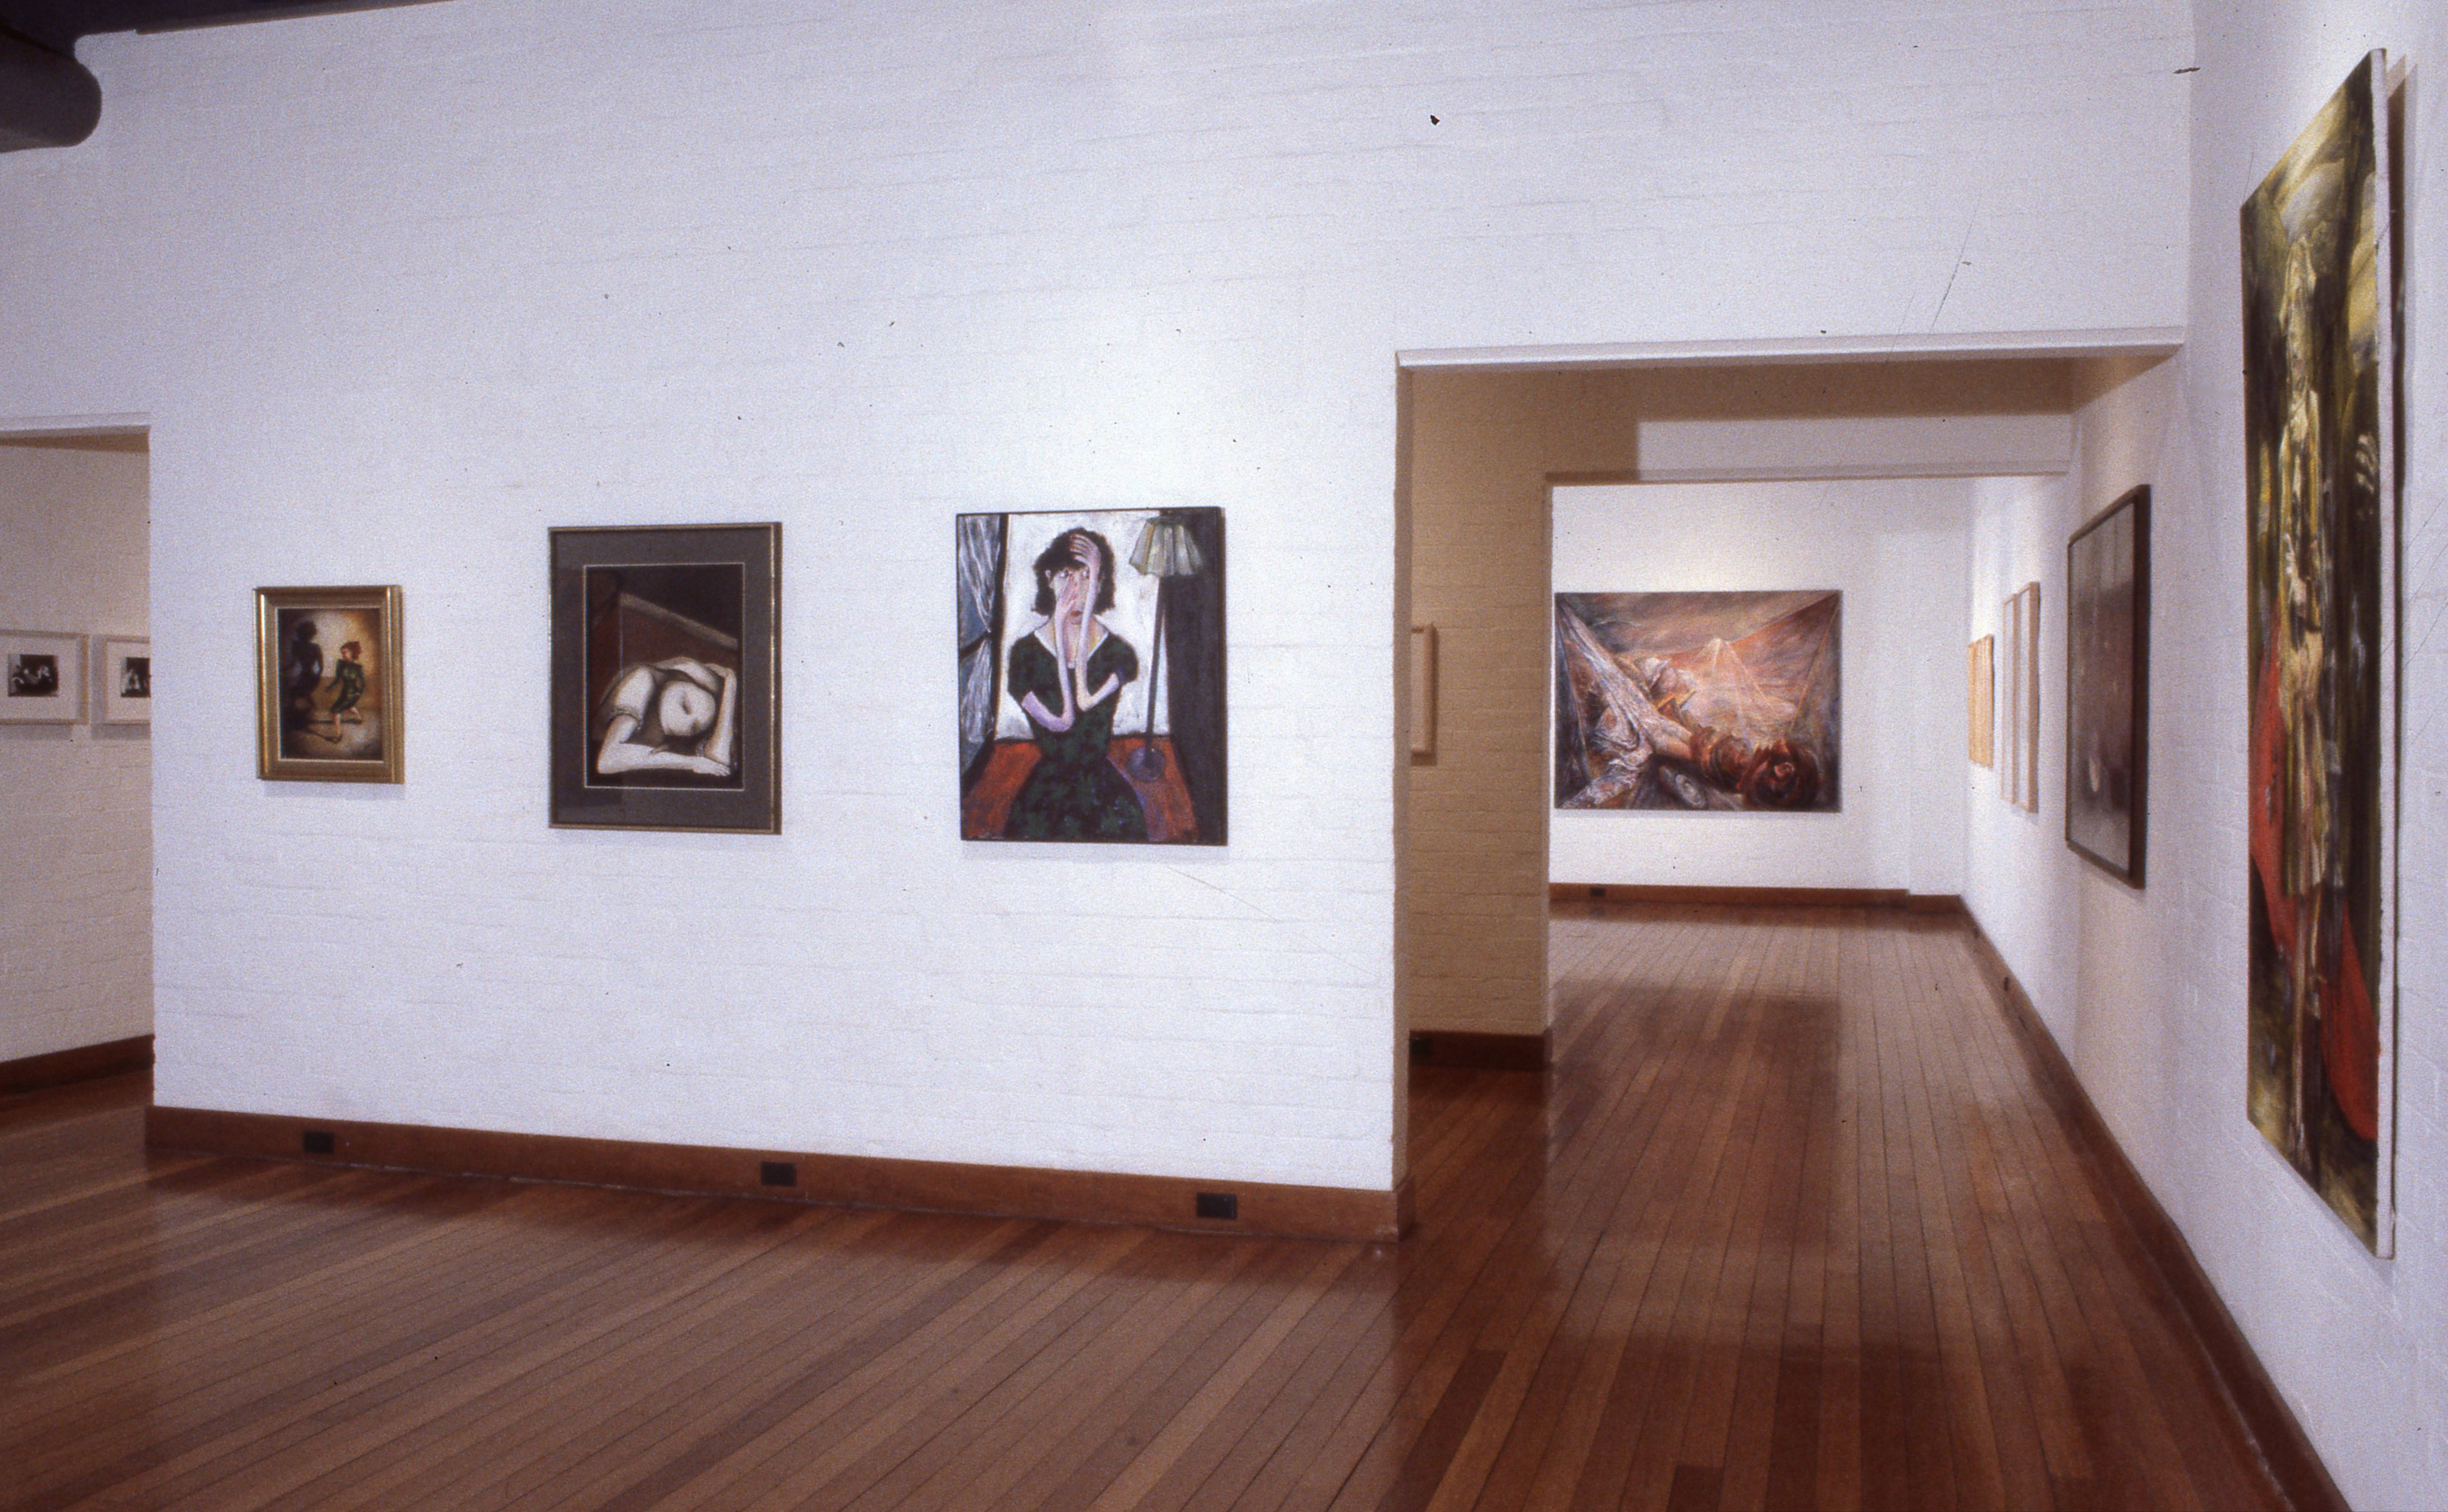 idg_archive_1991_the_intimate_experience_002_install.jpg